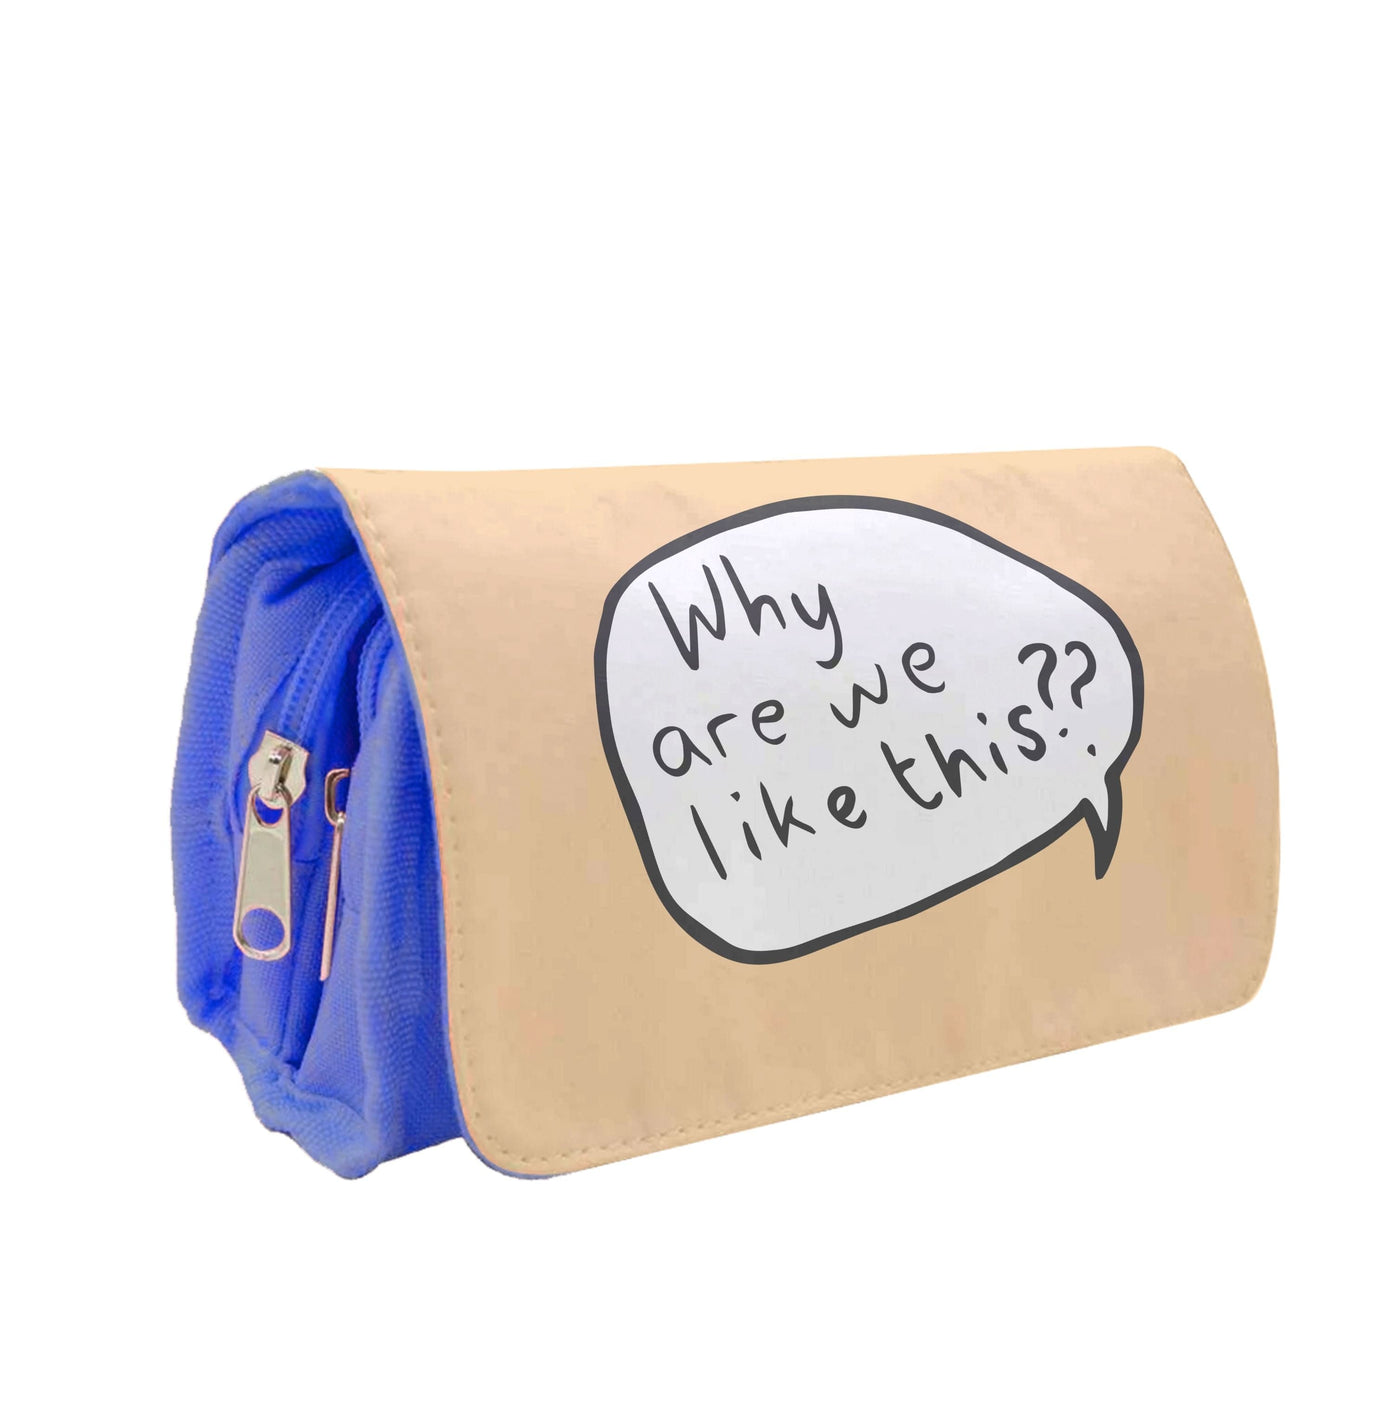 Why Are We Like This - Heartstopper Pencil Case